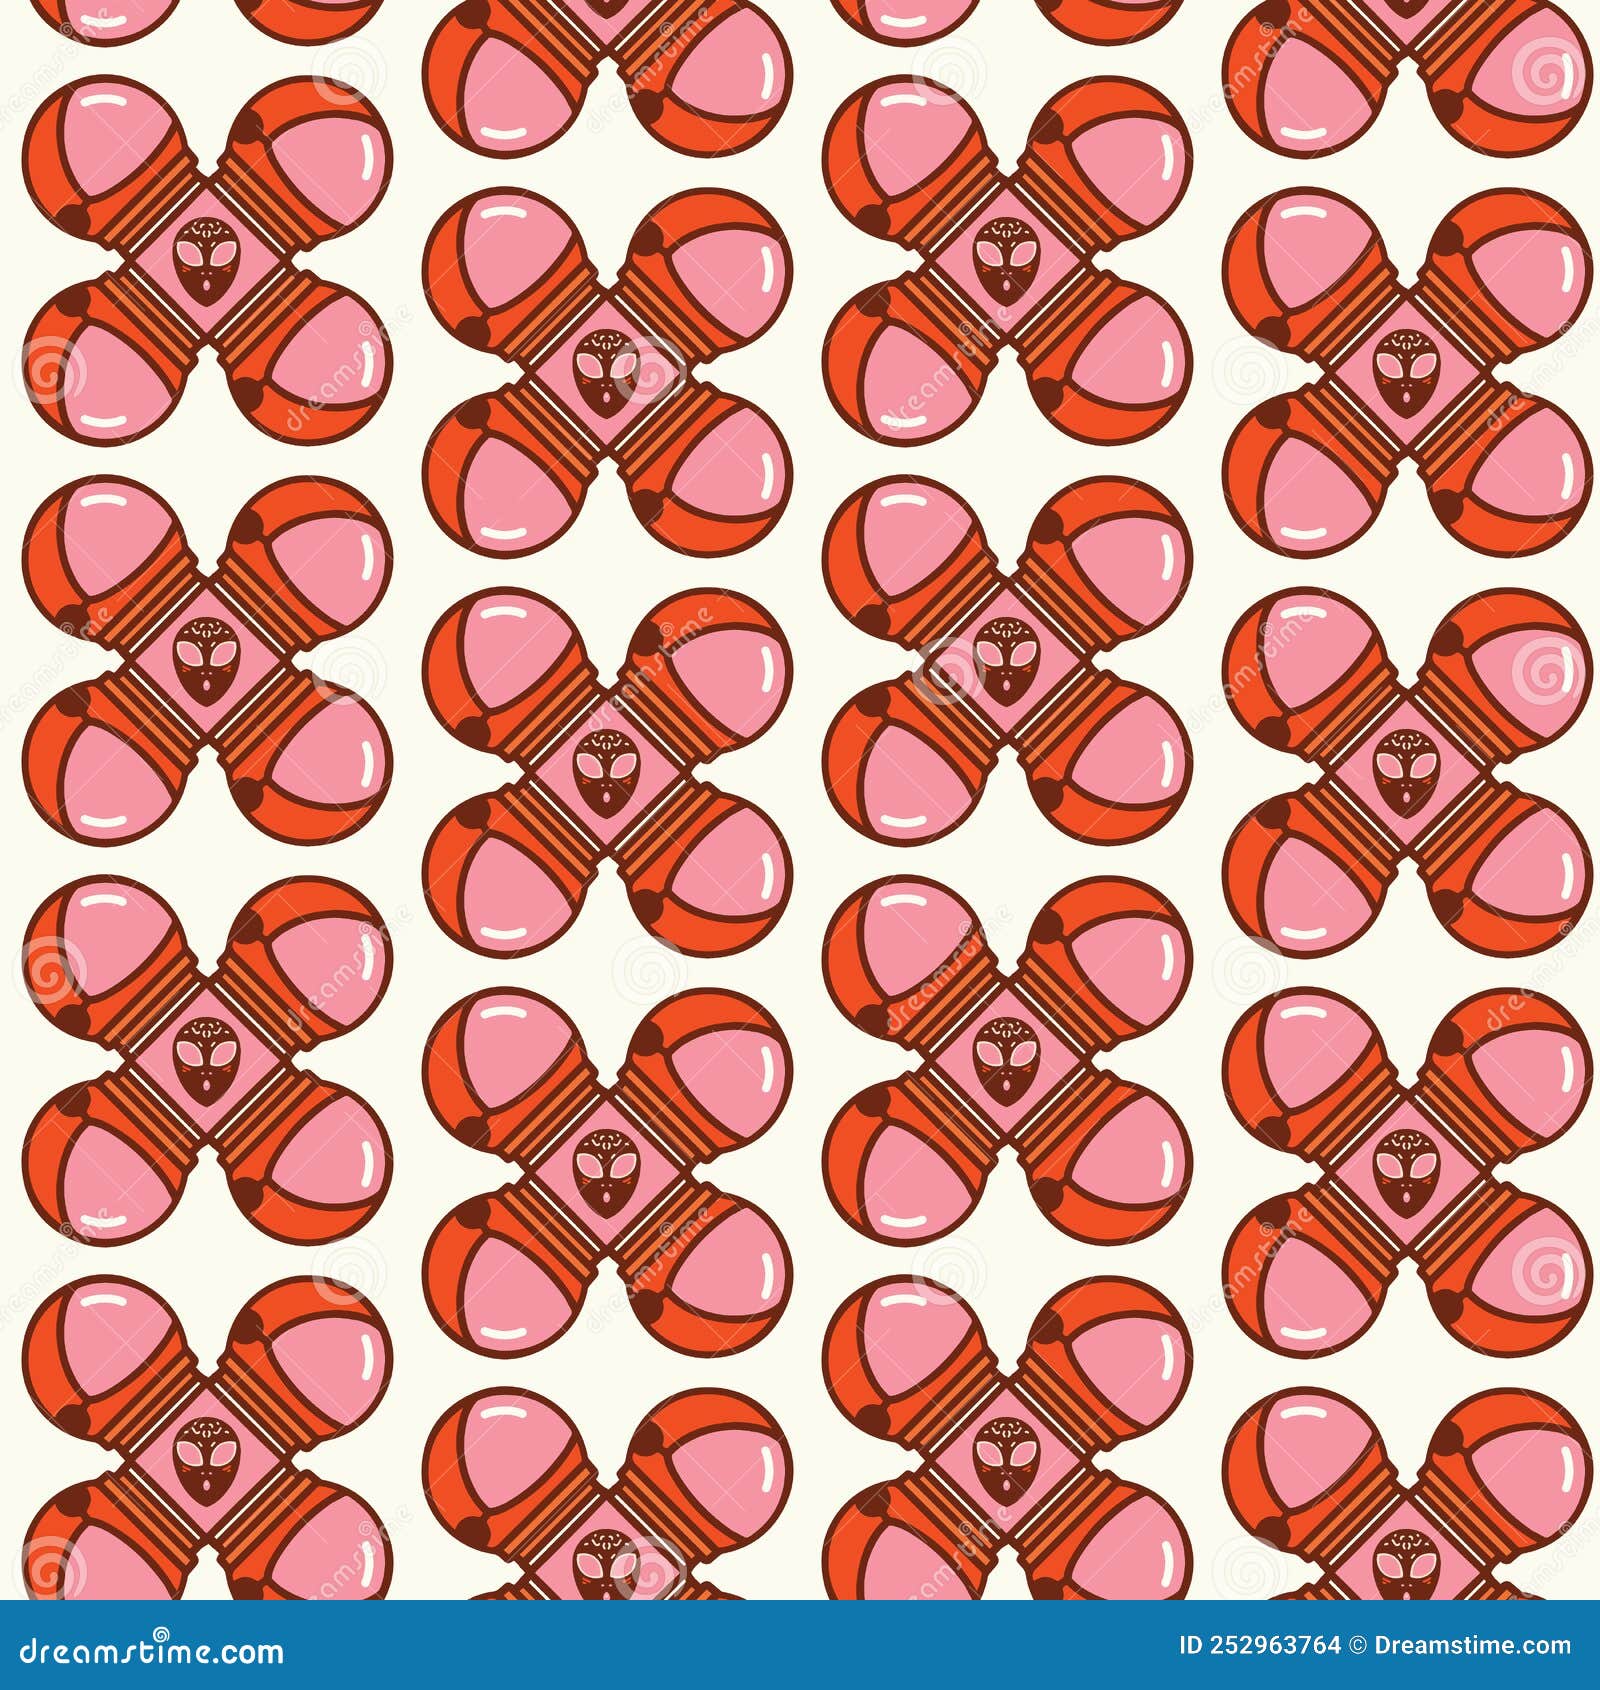 retro abstract floral pattern featuring astronaut helmets and alien faces in pink and orange